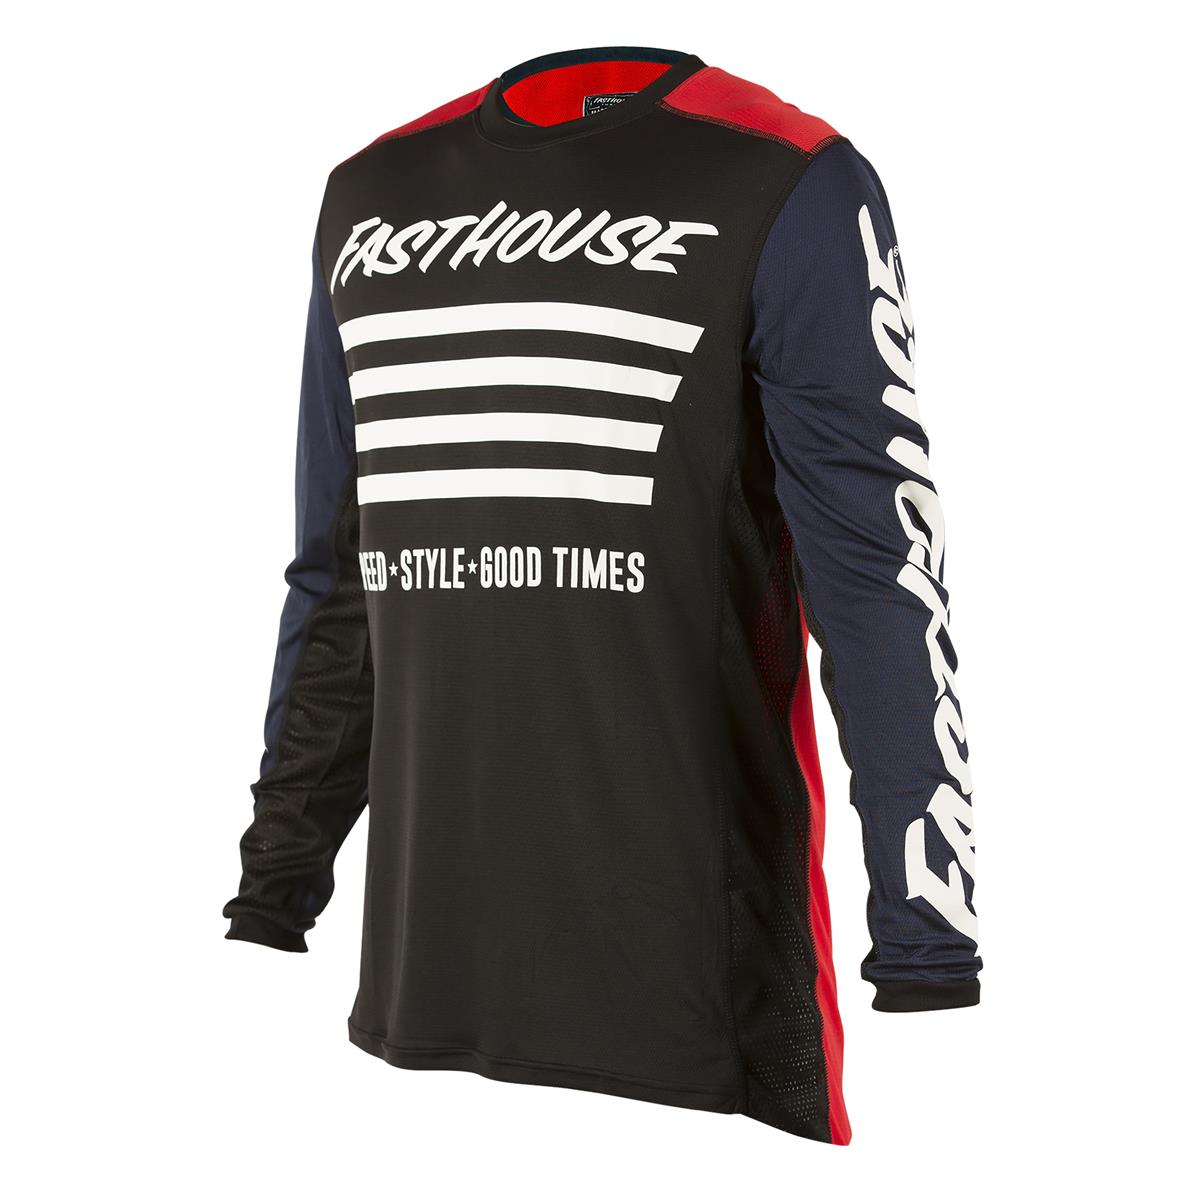 Fasthouse Jersey Stripes Red/Navy